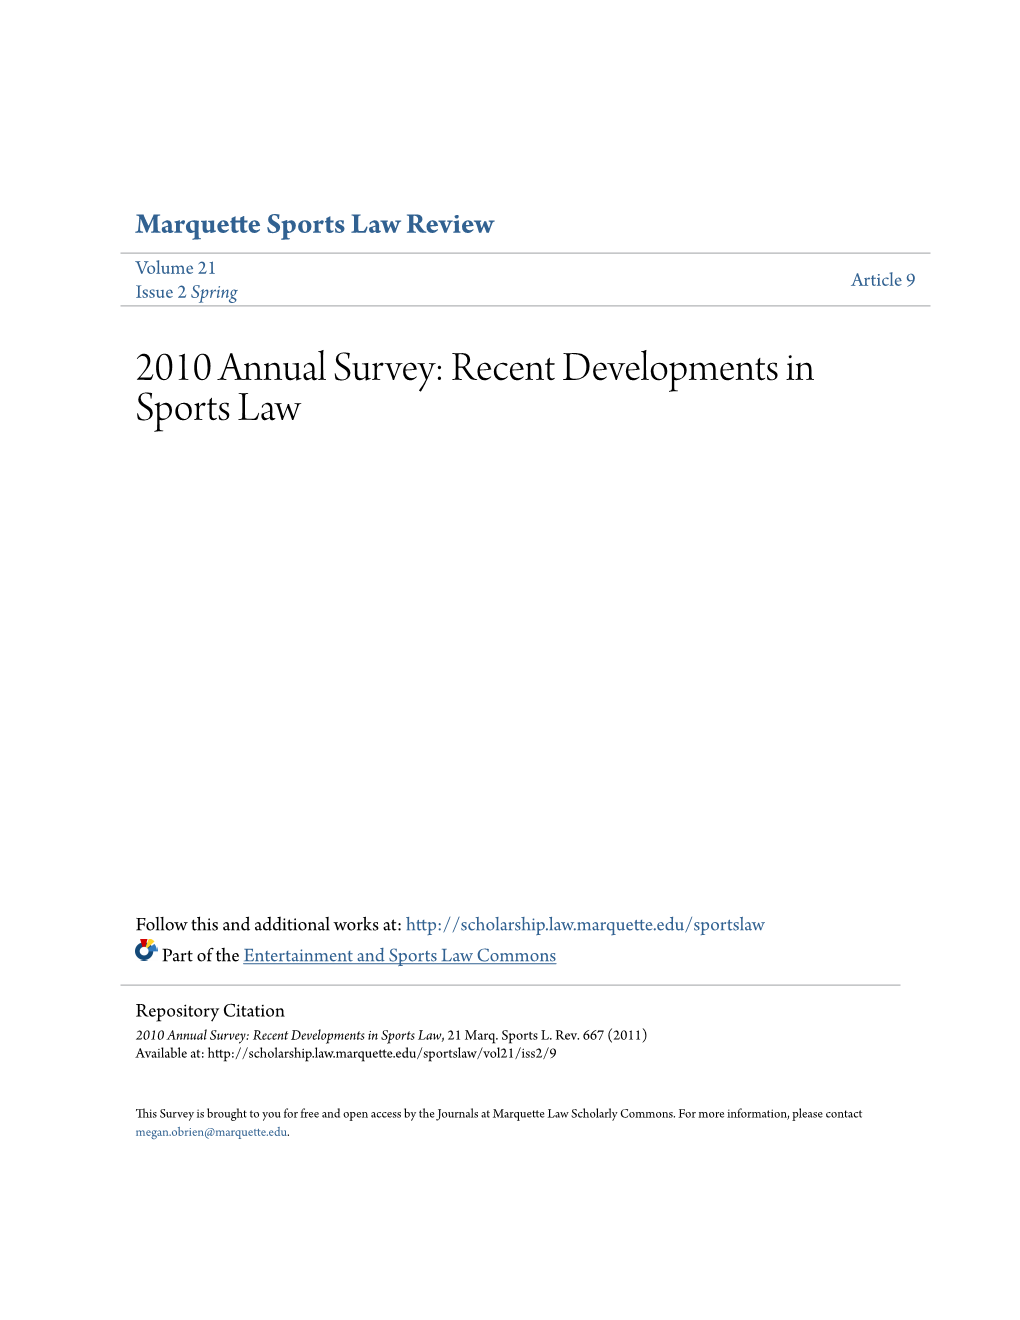 2010 Annual Survey: Recent Developments in Sports Law